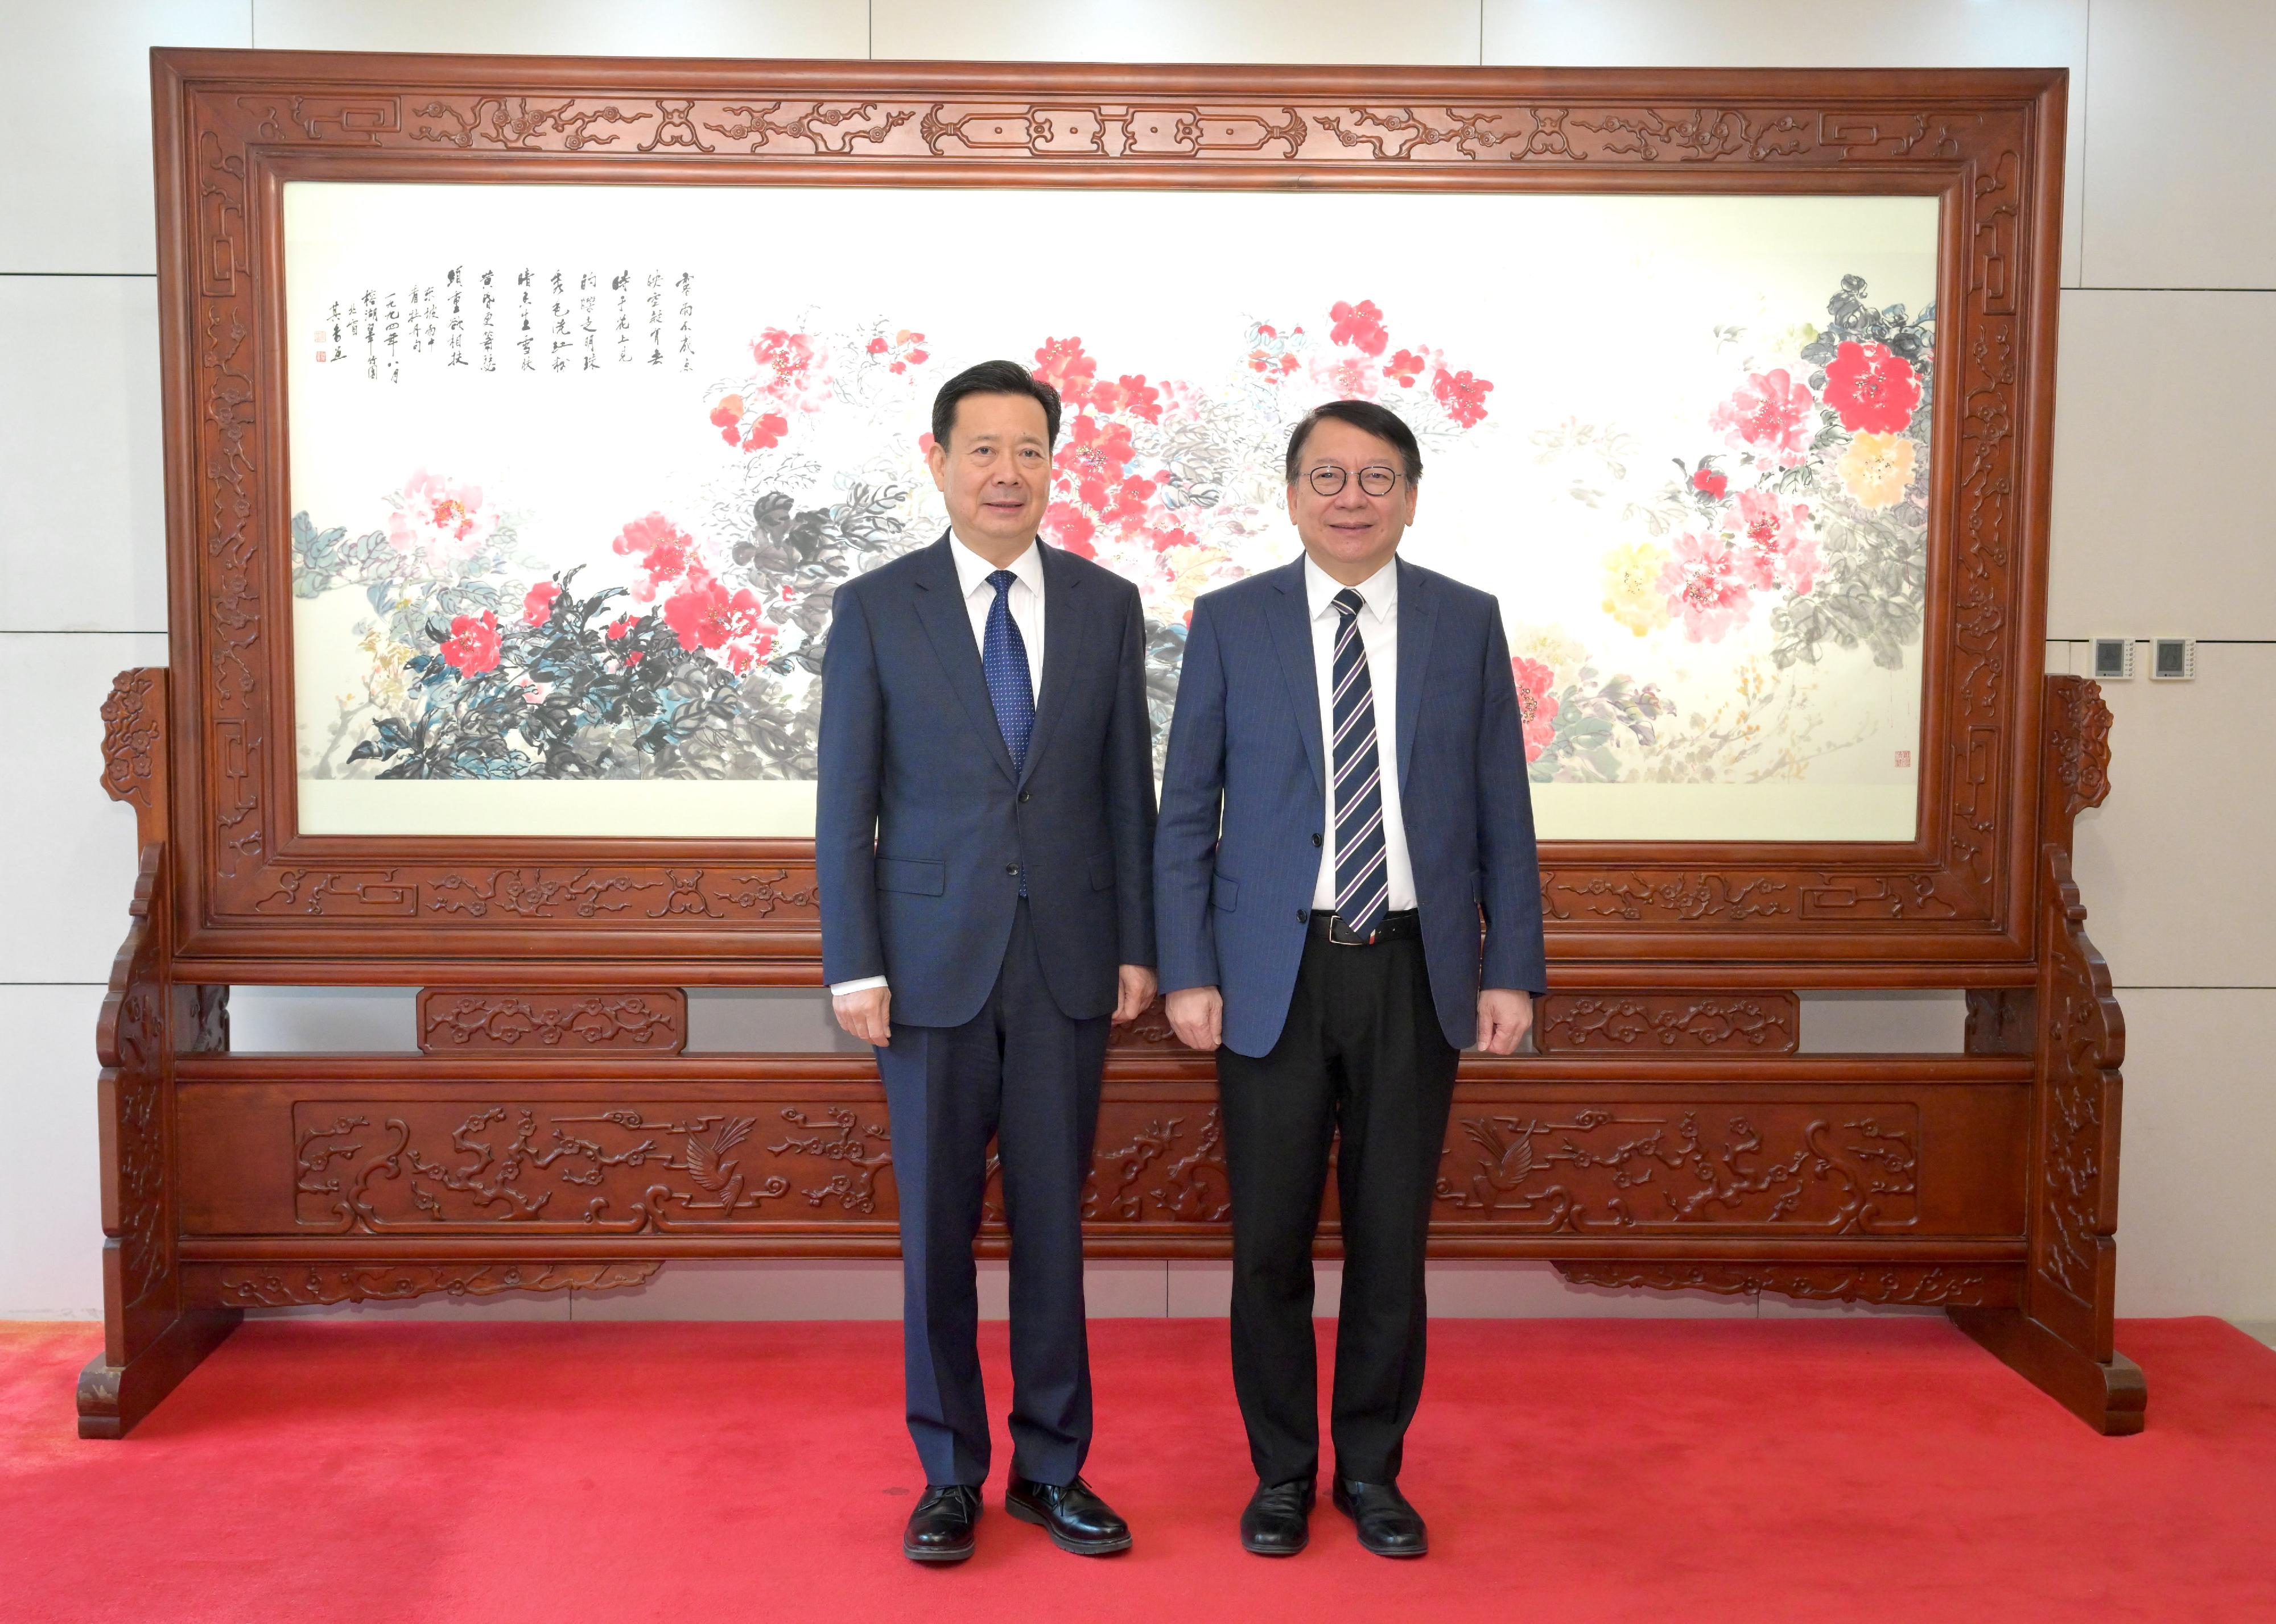 The Chief Secretary for Administration, Mr Chan Kwok-ki (right), meets with Vice-Minister of Culture and Tourism and Administrator of the National Cultural Heritage Administration, Mr Li Qun (left), in Beijing today (April 27). 